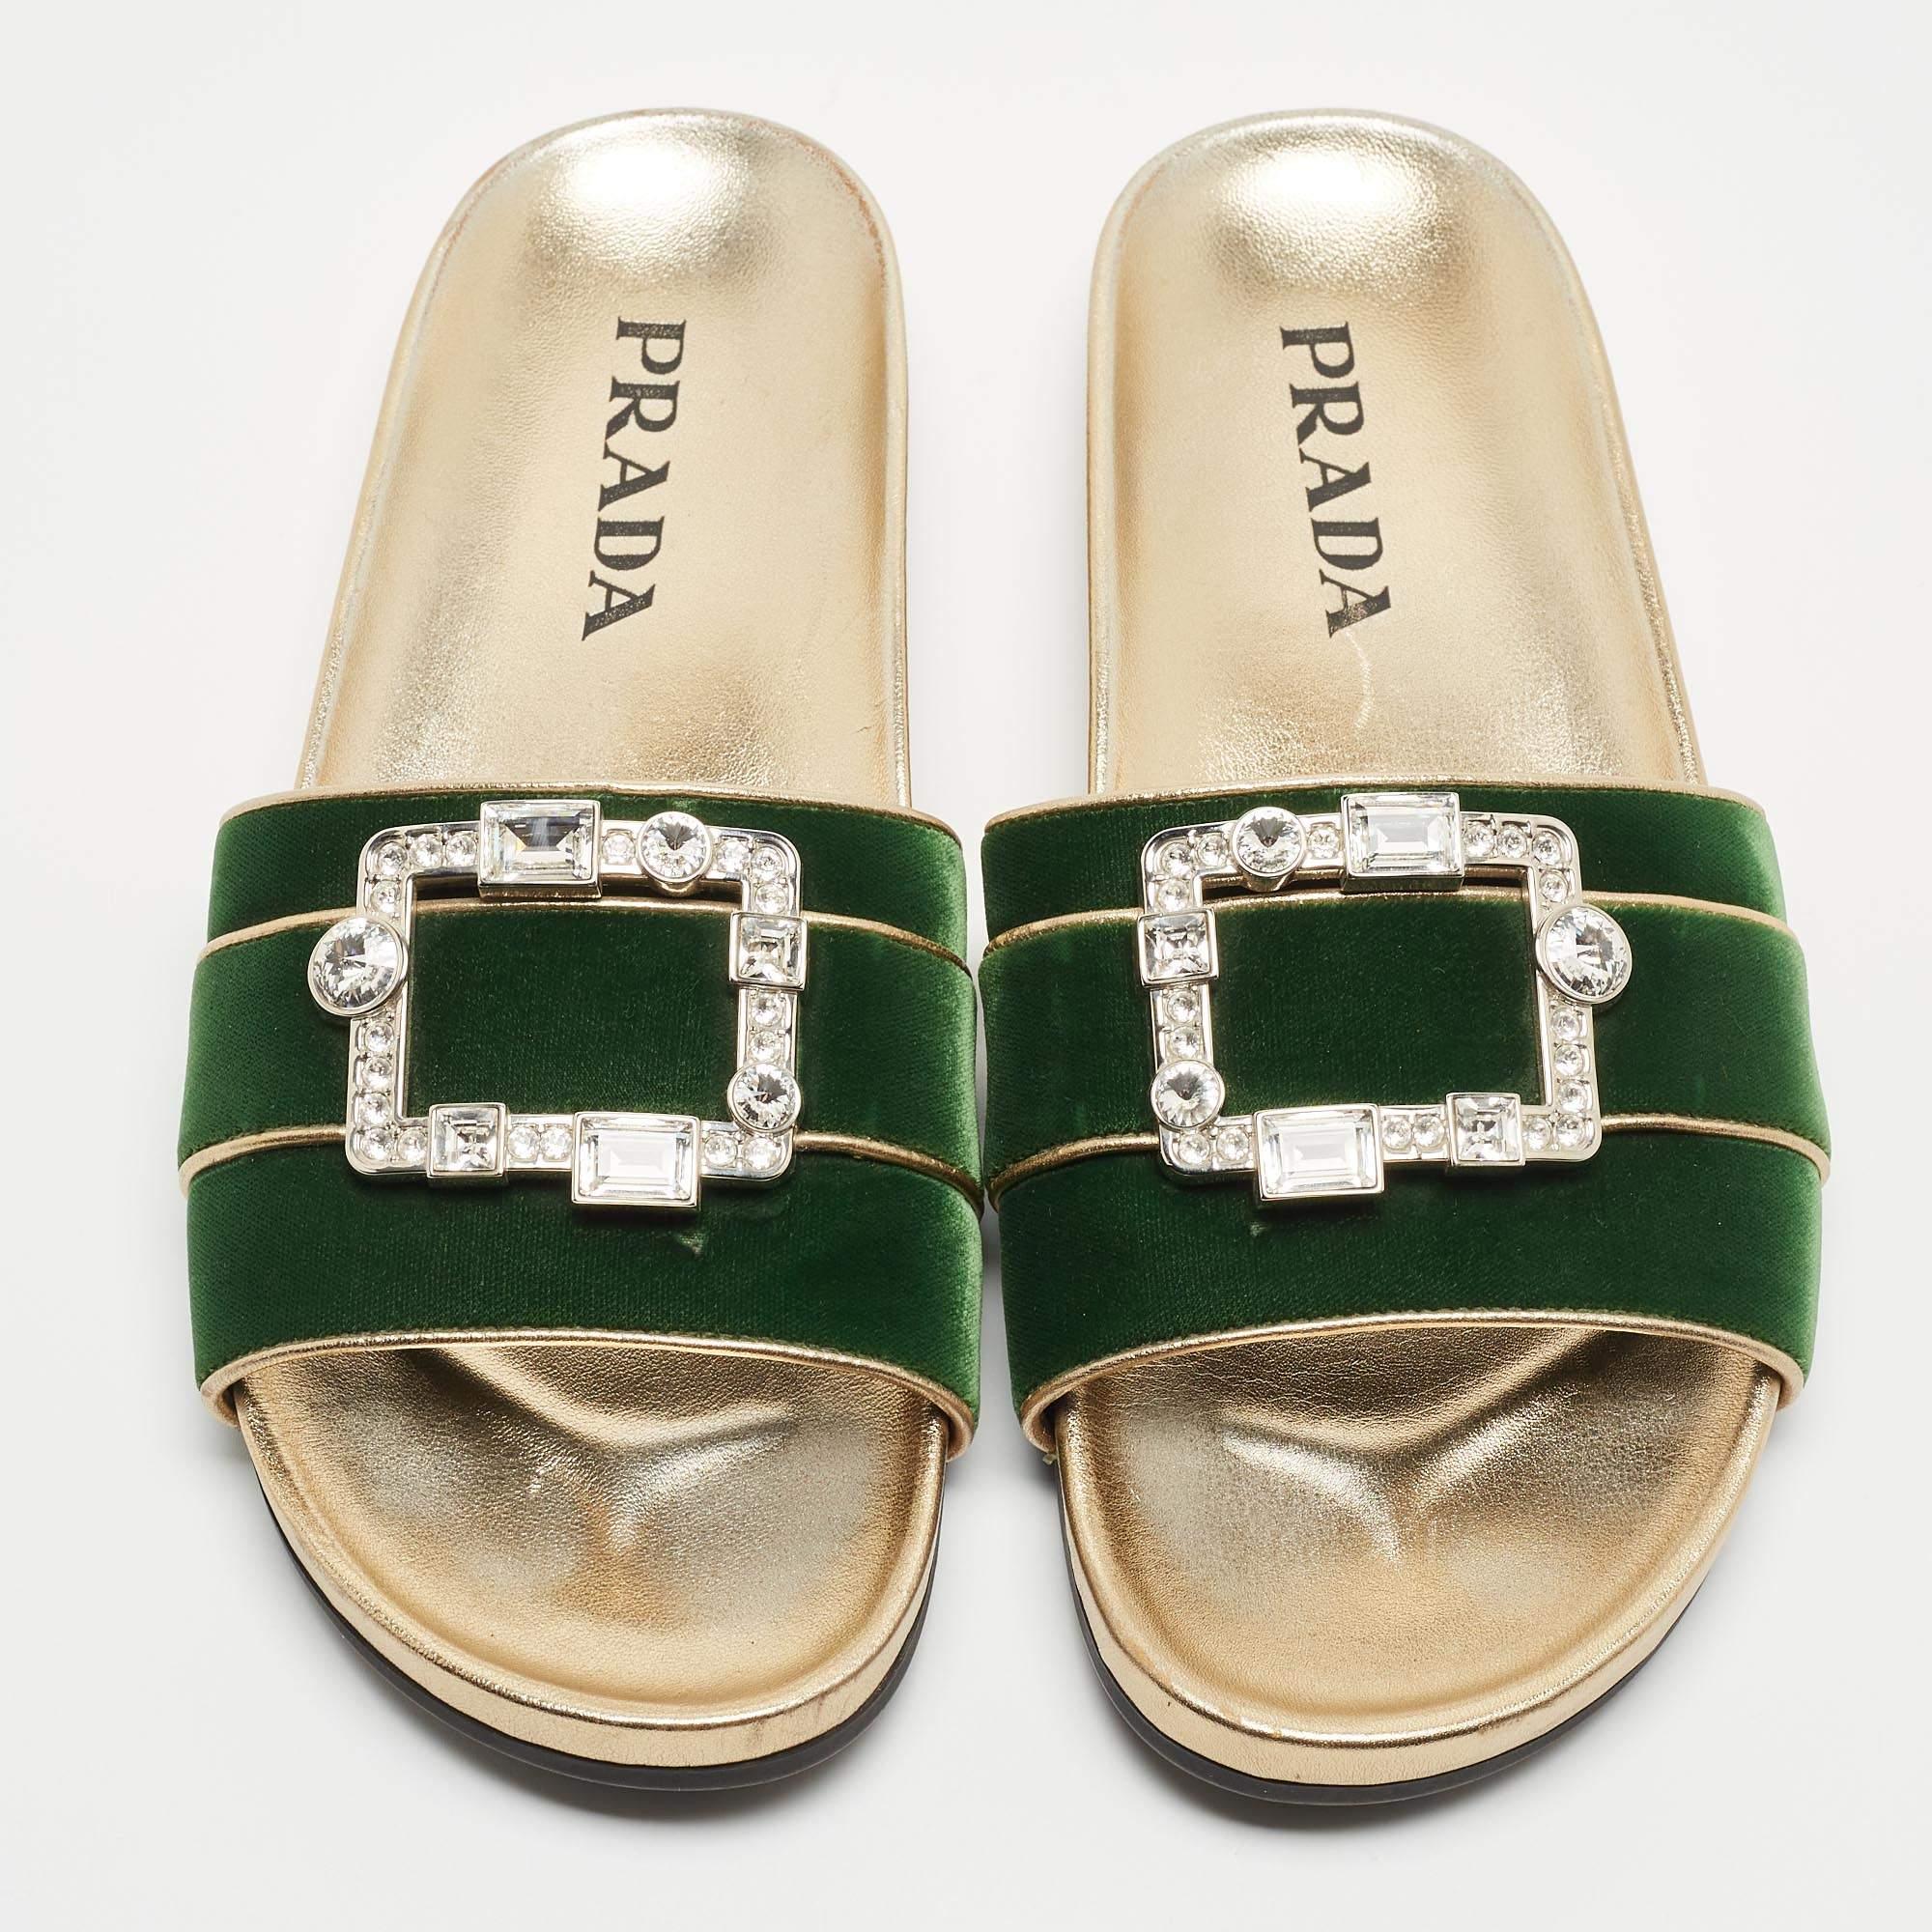 These well-crafted Prada flats have got you covered for all-day plans. They come in a versatile design, and they look great on the feet.

